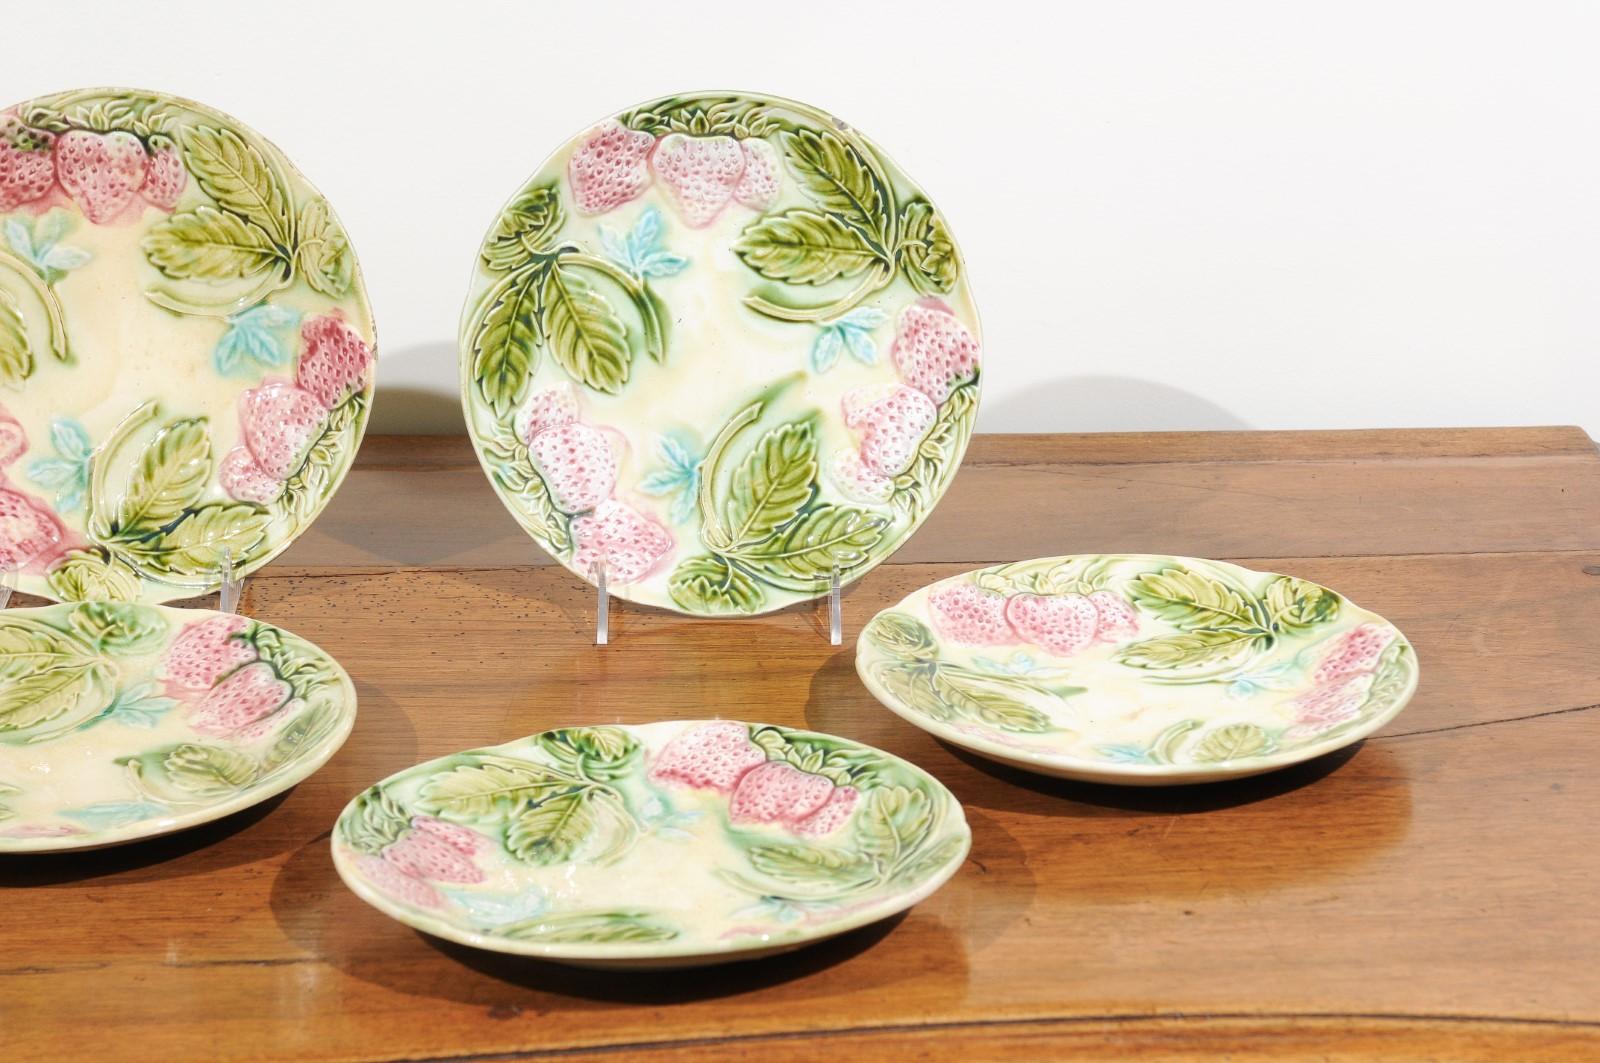 French 19th Century Majolica Plates with Raised Decor of Strawberries and Leaves For Sale 2